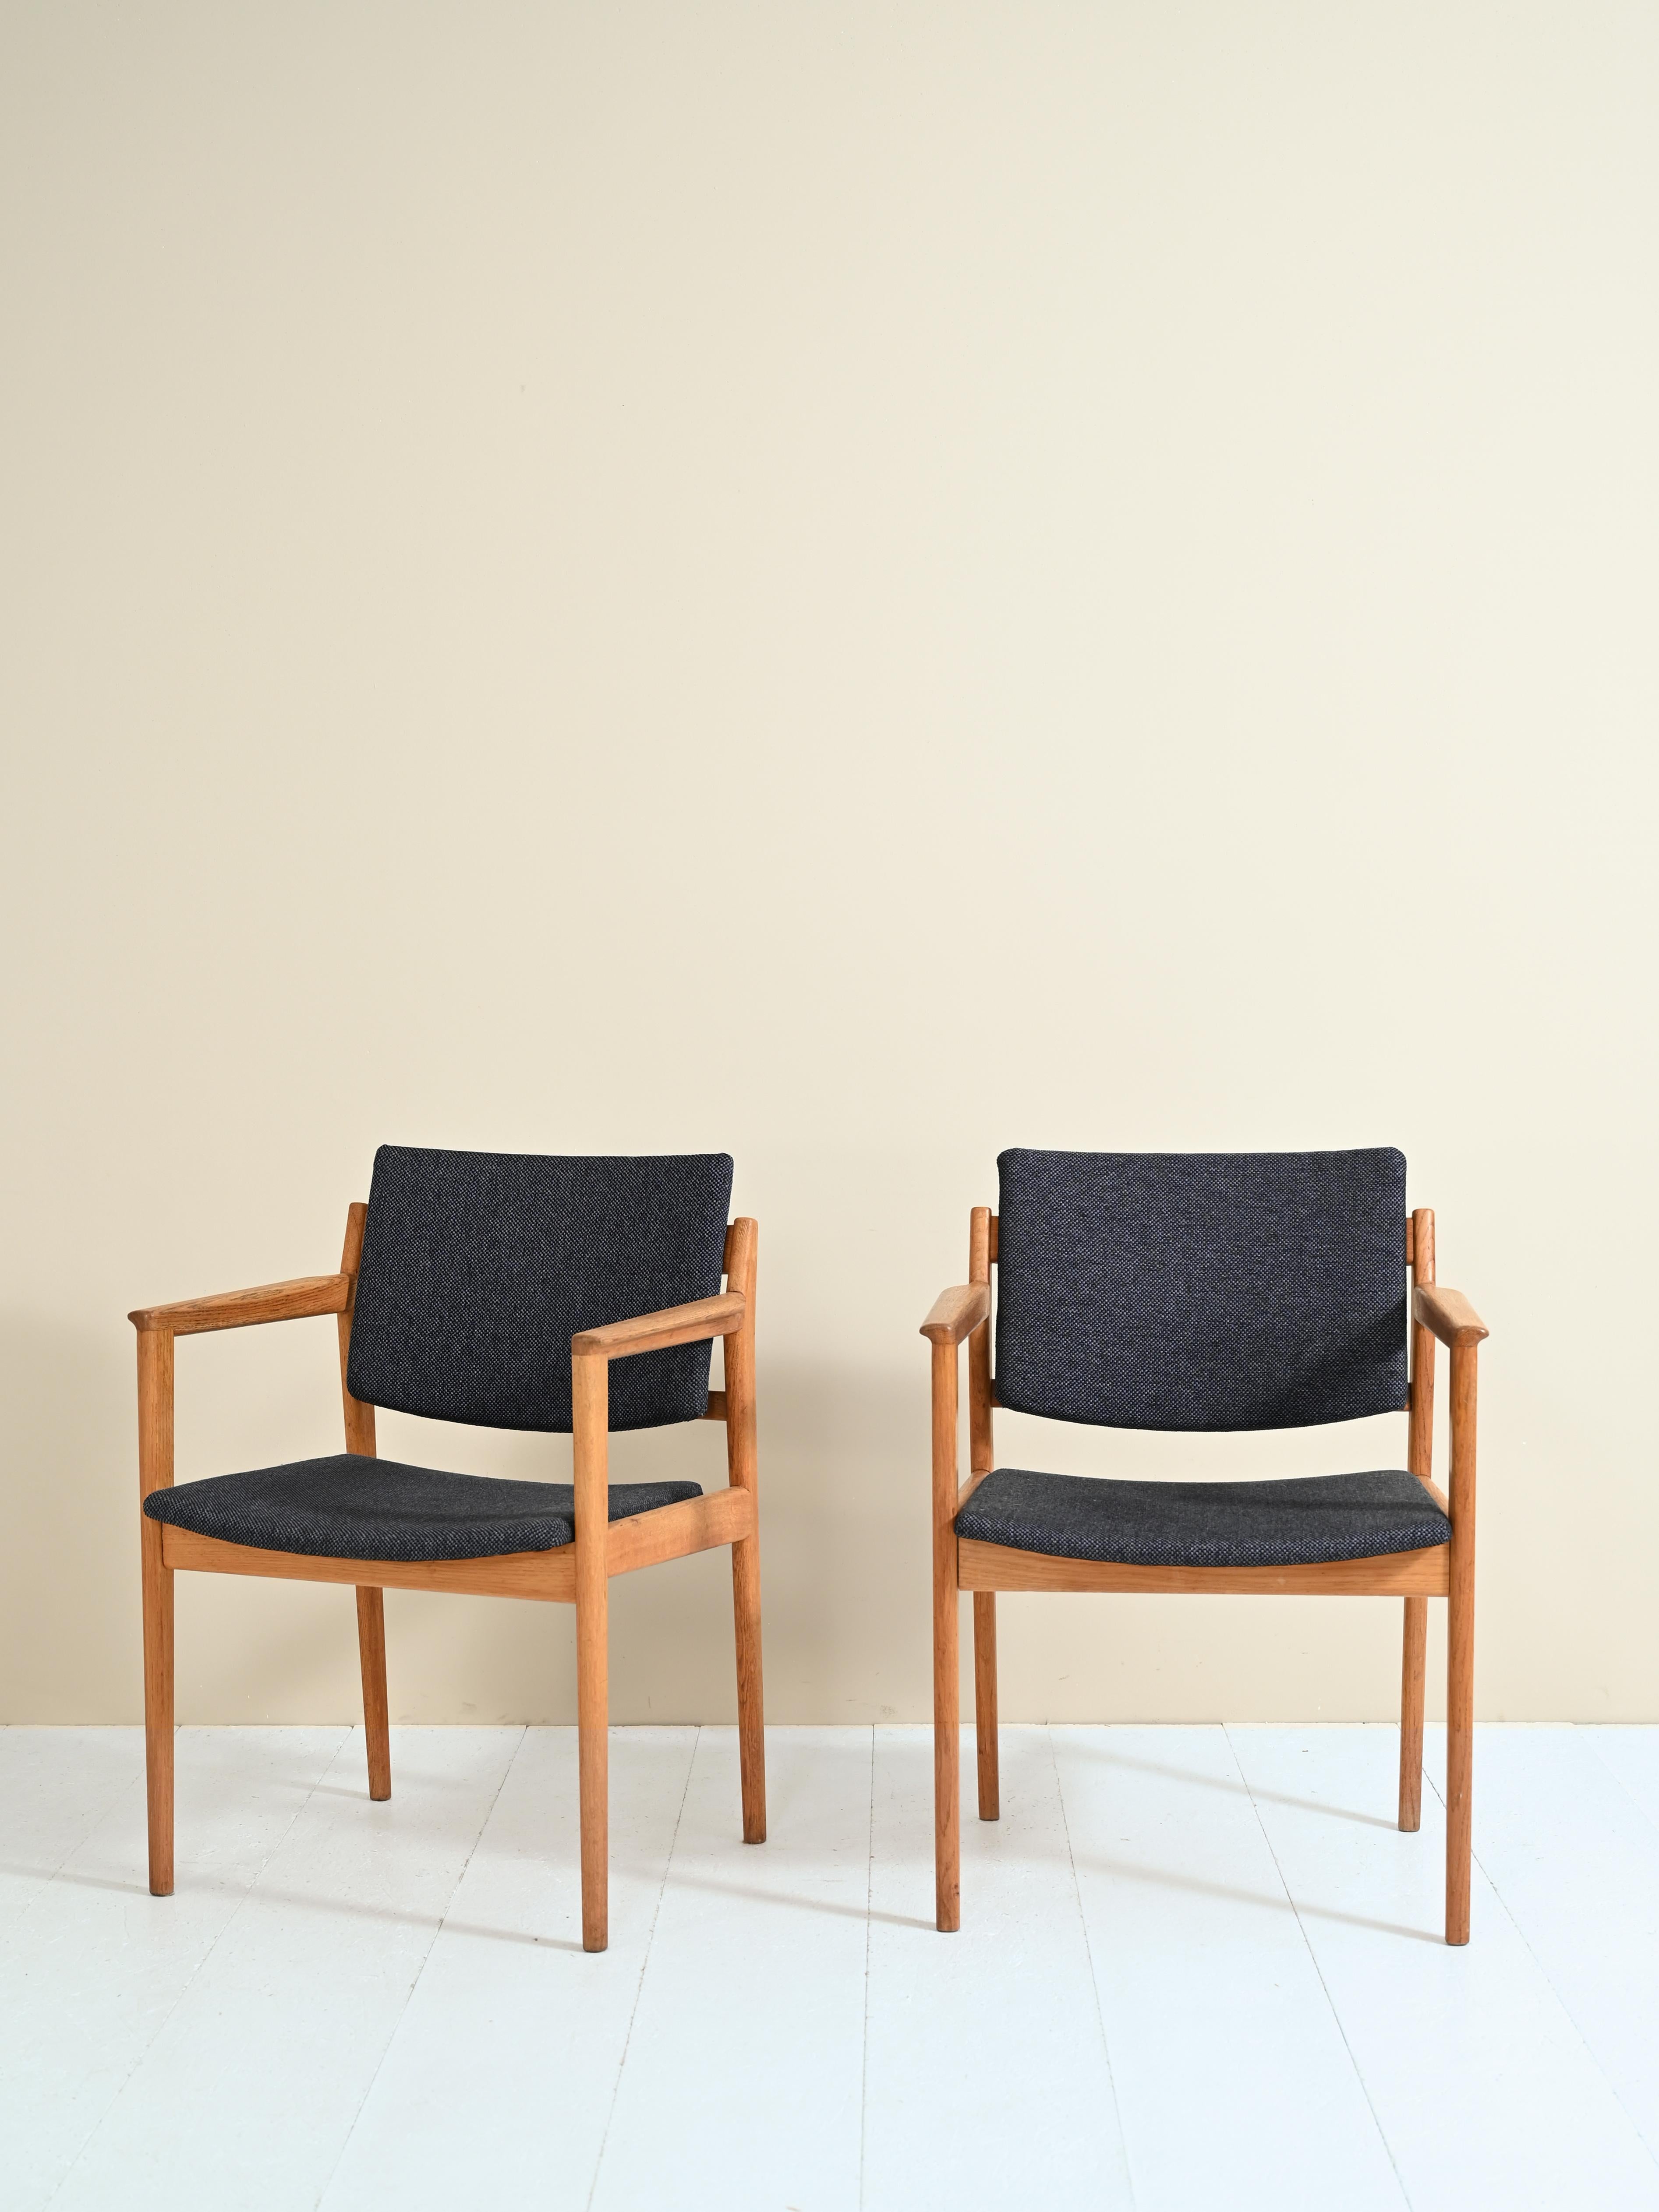 Pair of armchairs with armrests made in Sweden in the 1960s by Karl Erik Ekselius for J.O. Carlsson.

The armchairs features the simple and elegant Scandinavian mid-century forms; the frame is made of oak wood.

The back and seat are covered by